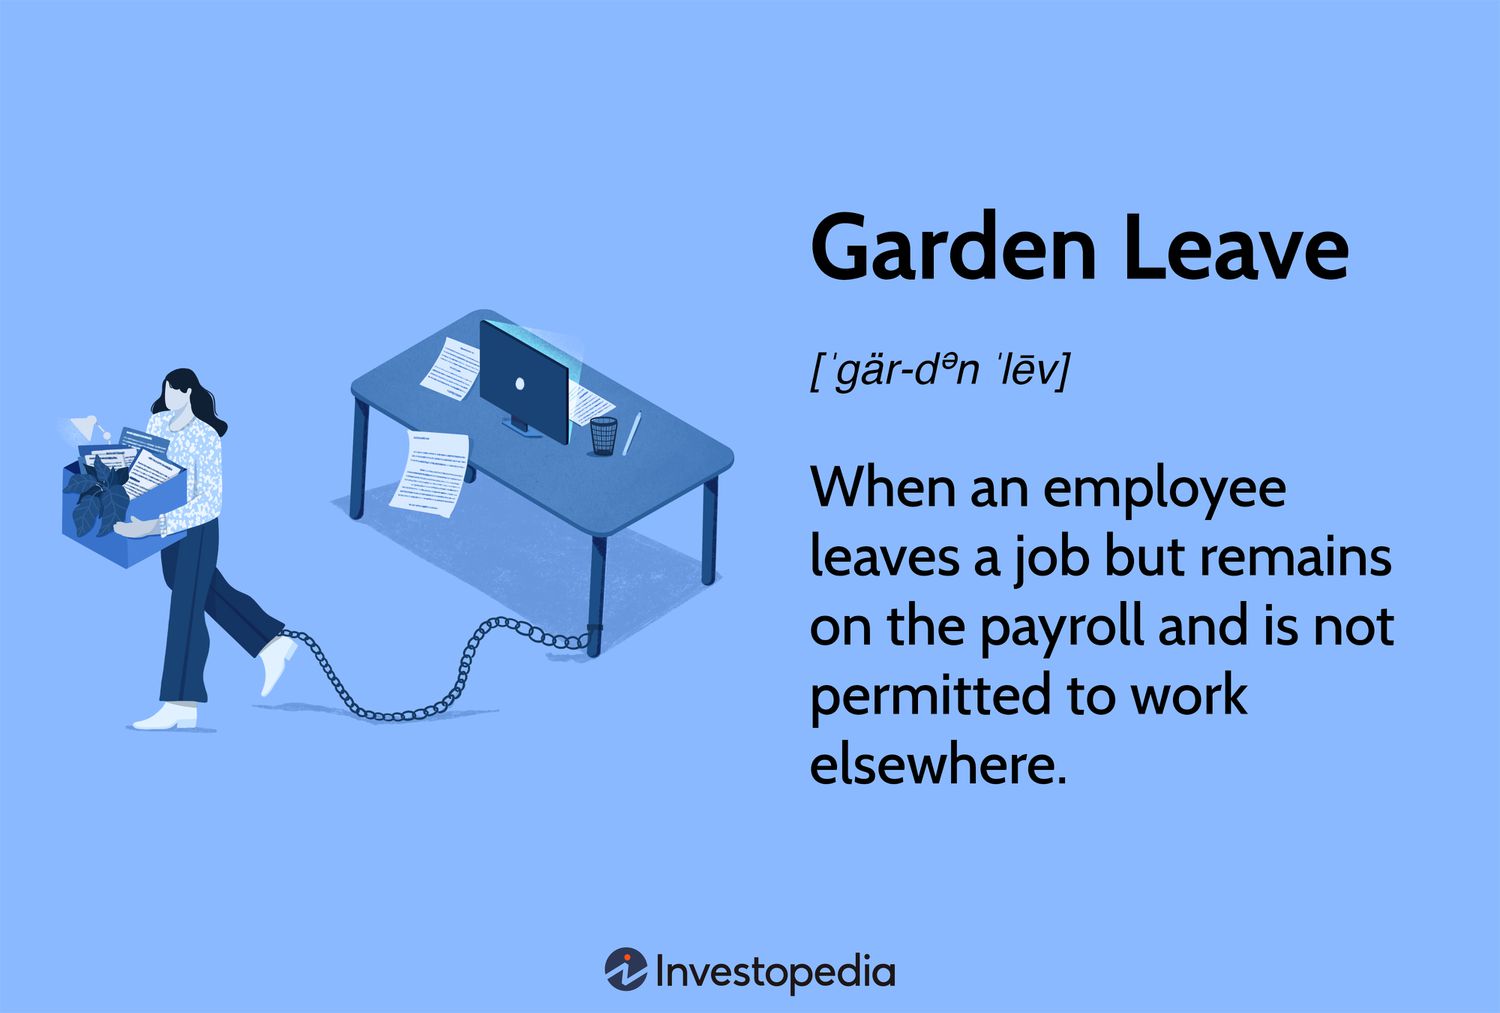 Garden Leave: When an employee leaves a job but remains on the payroll and is not permitted to work elsewhere.